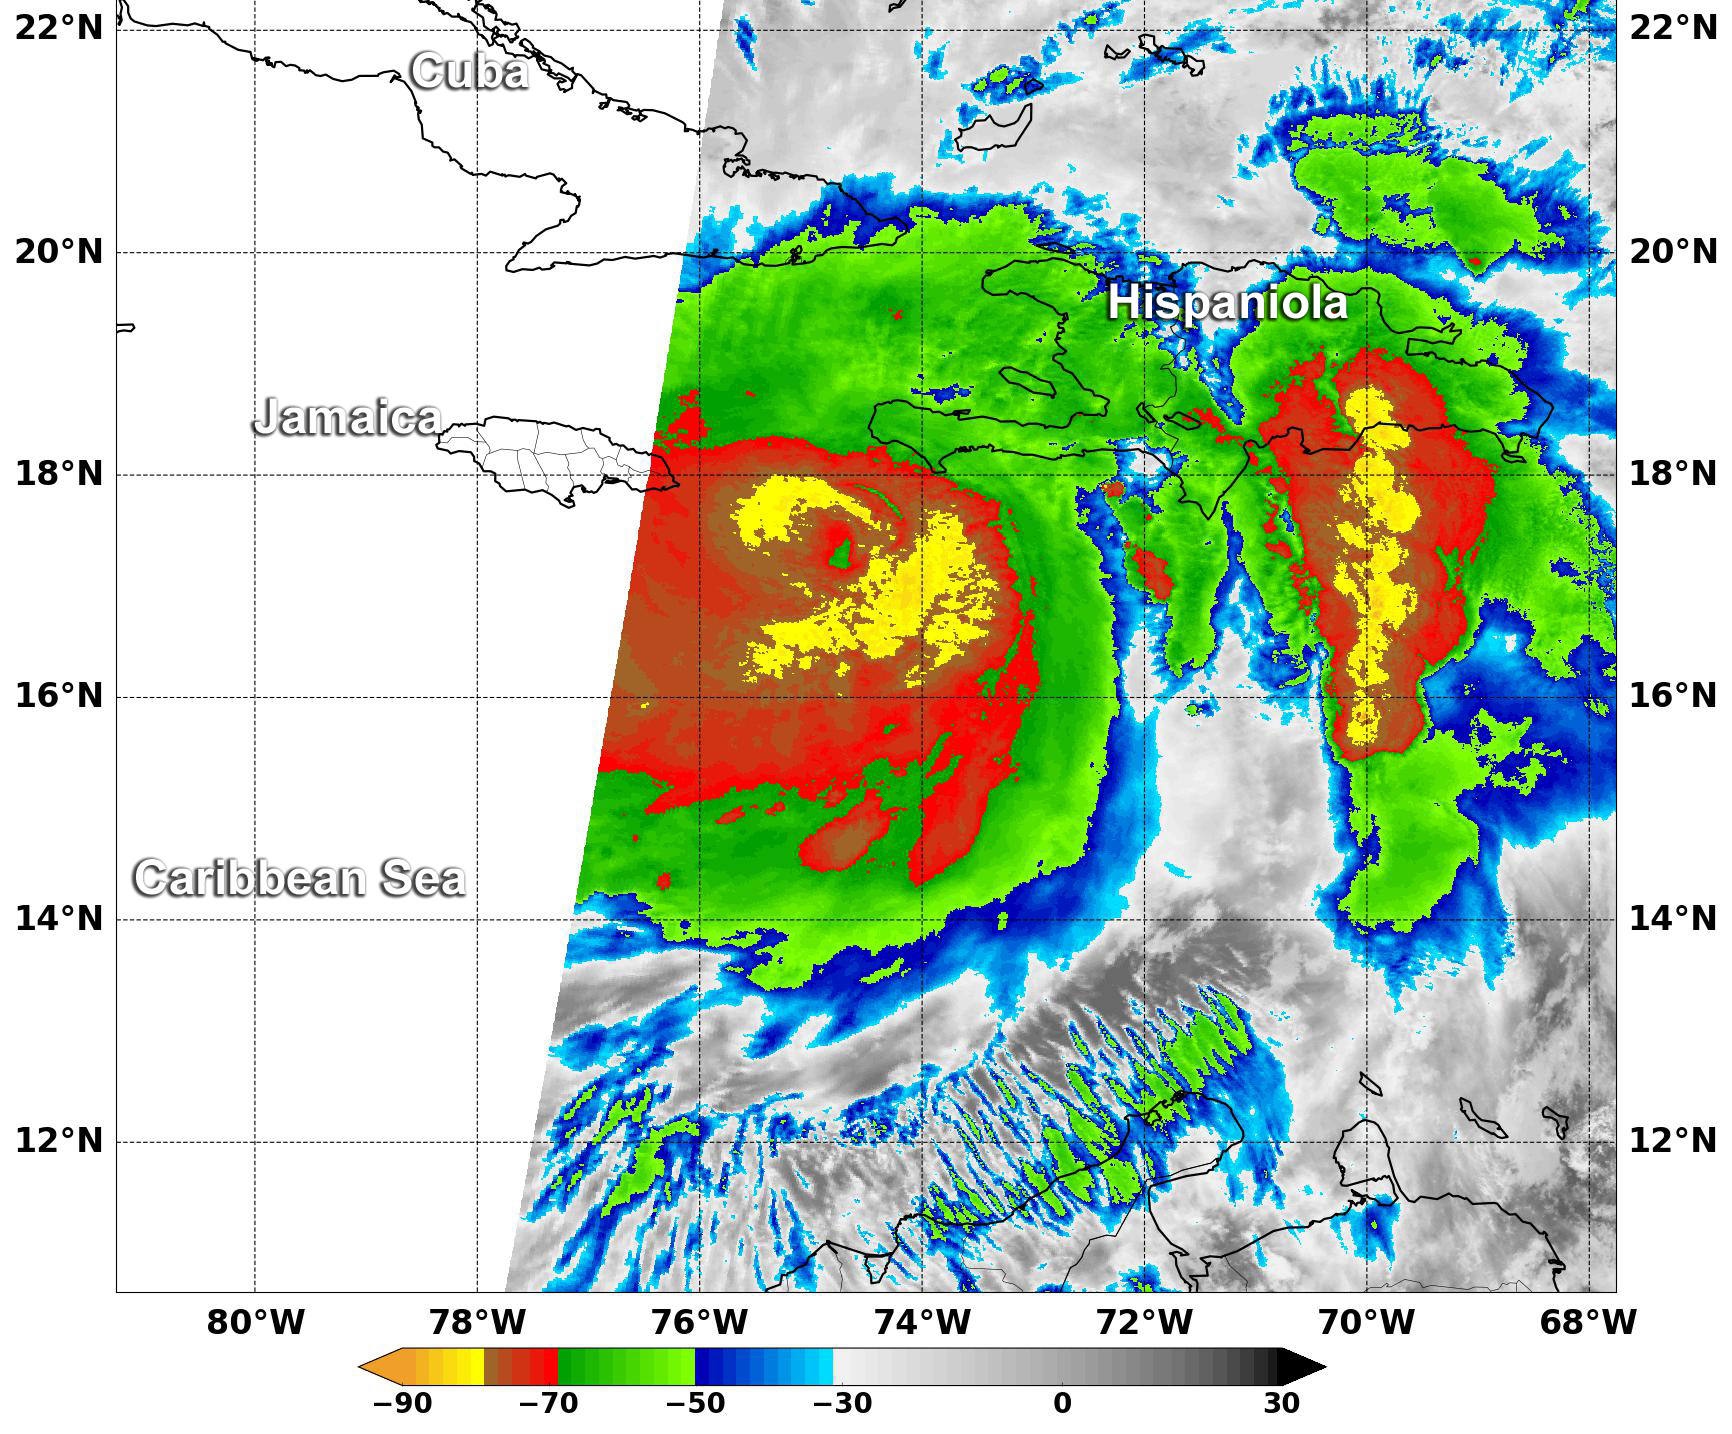 Infrared image of Matthew from Aqua satellite with clouds marked in red and green.